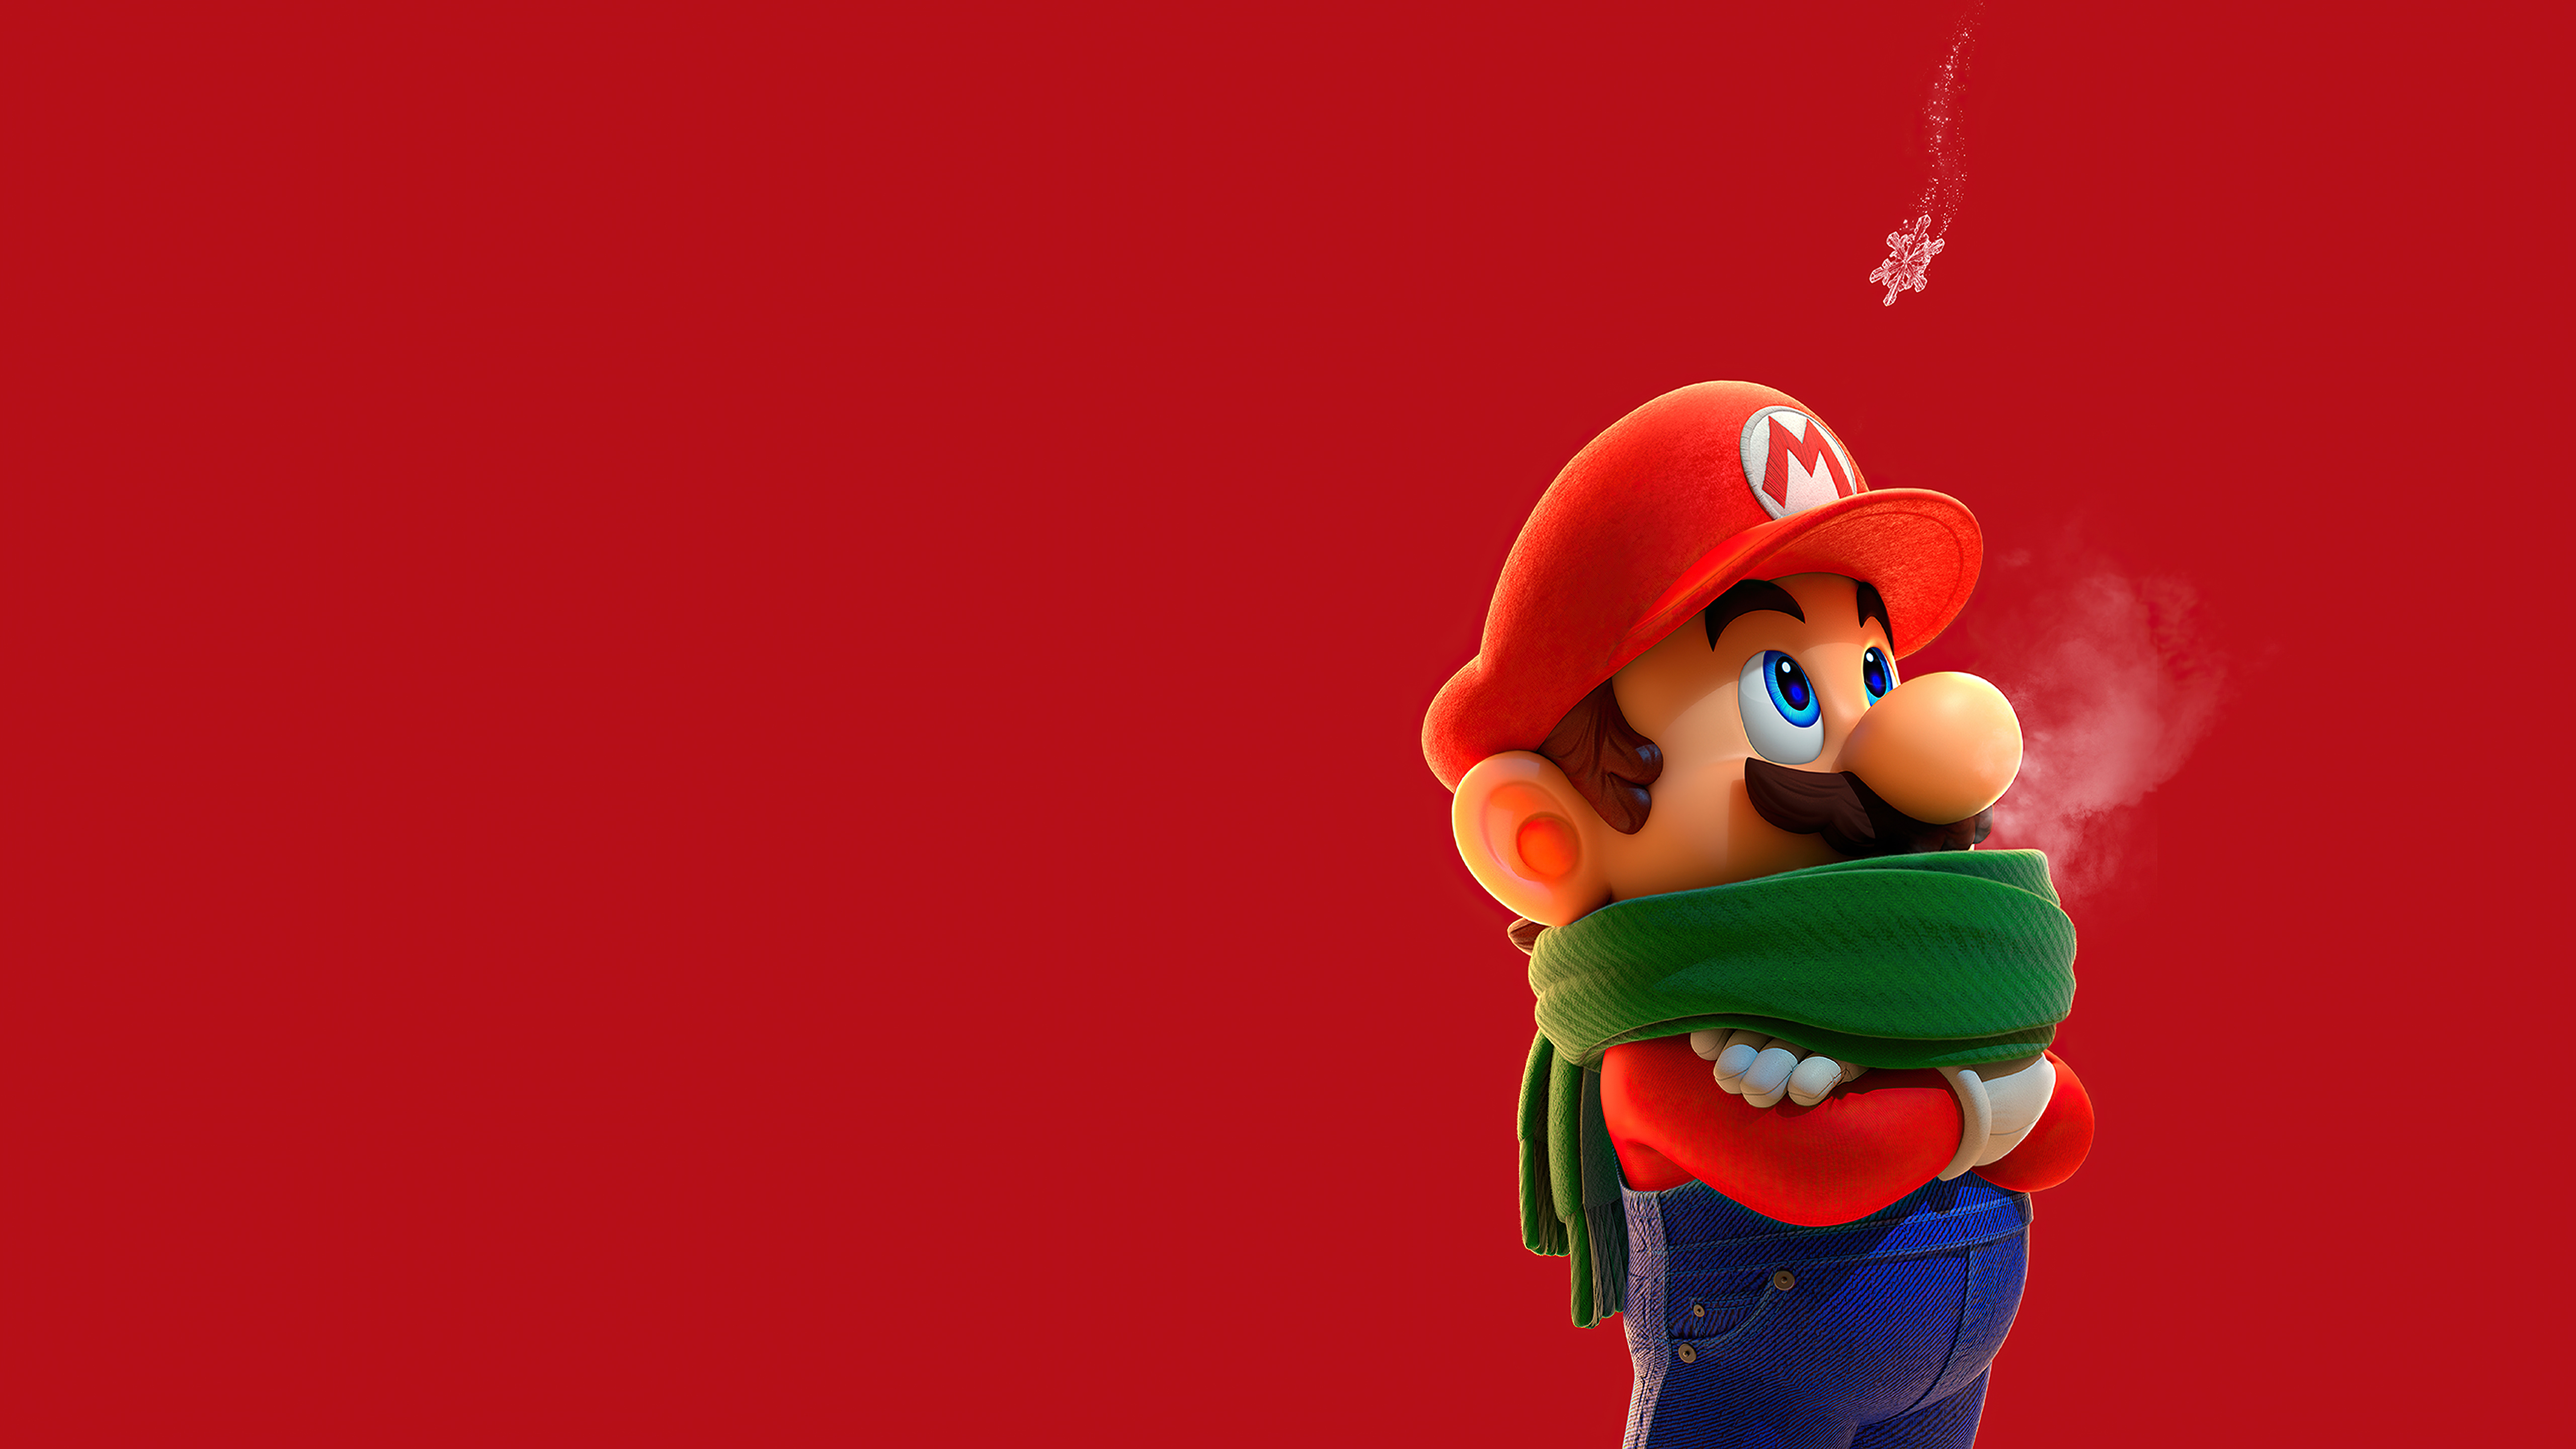 Super mario hd games k wallpapers images backgrounds photos and pictures